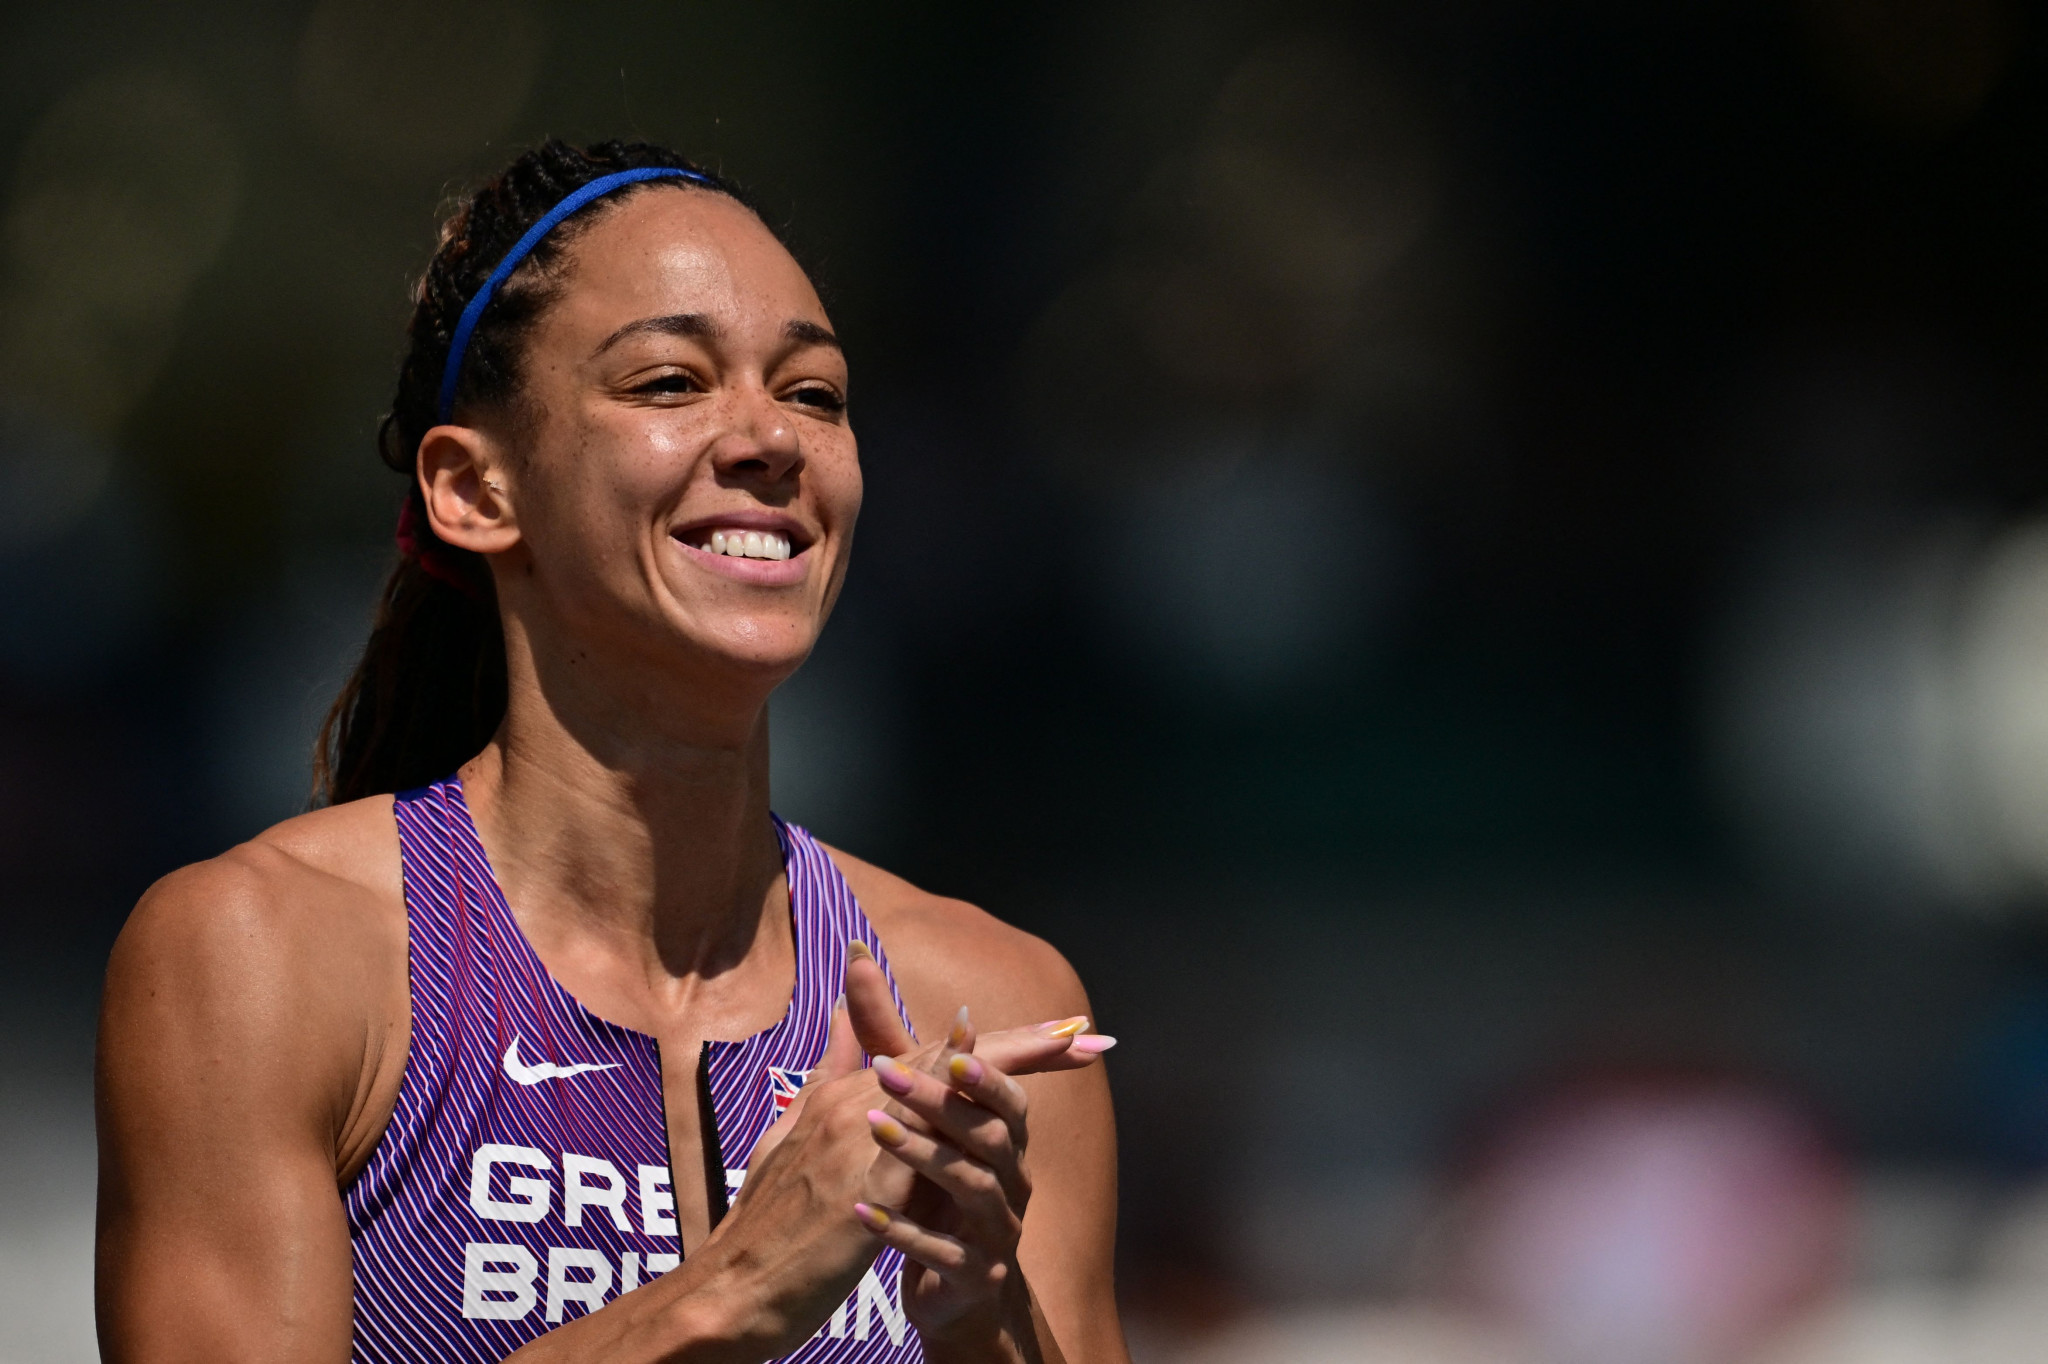 Britain's Katarina Johnson-Thompson recorded personal bests in the javelin throw and 800m to help her take a second heptathlon World Championships gold ©Getty Images